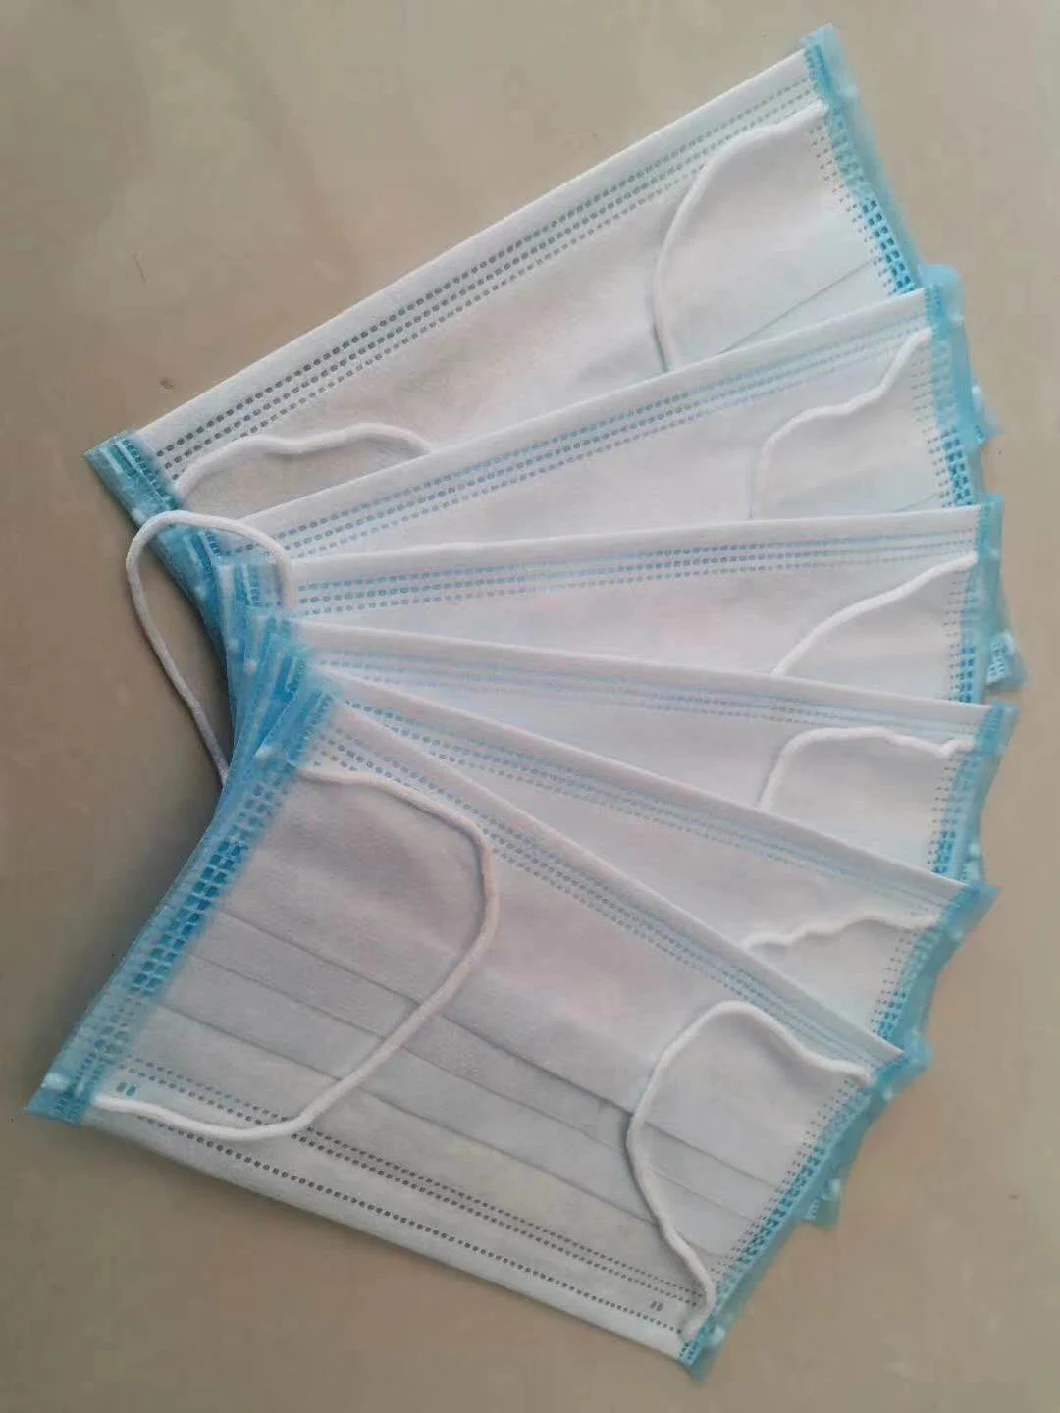 Factory Stocks of Face Mask 3ply Dust Face Mask Water Proof Disposable Face Mask